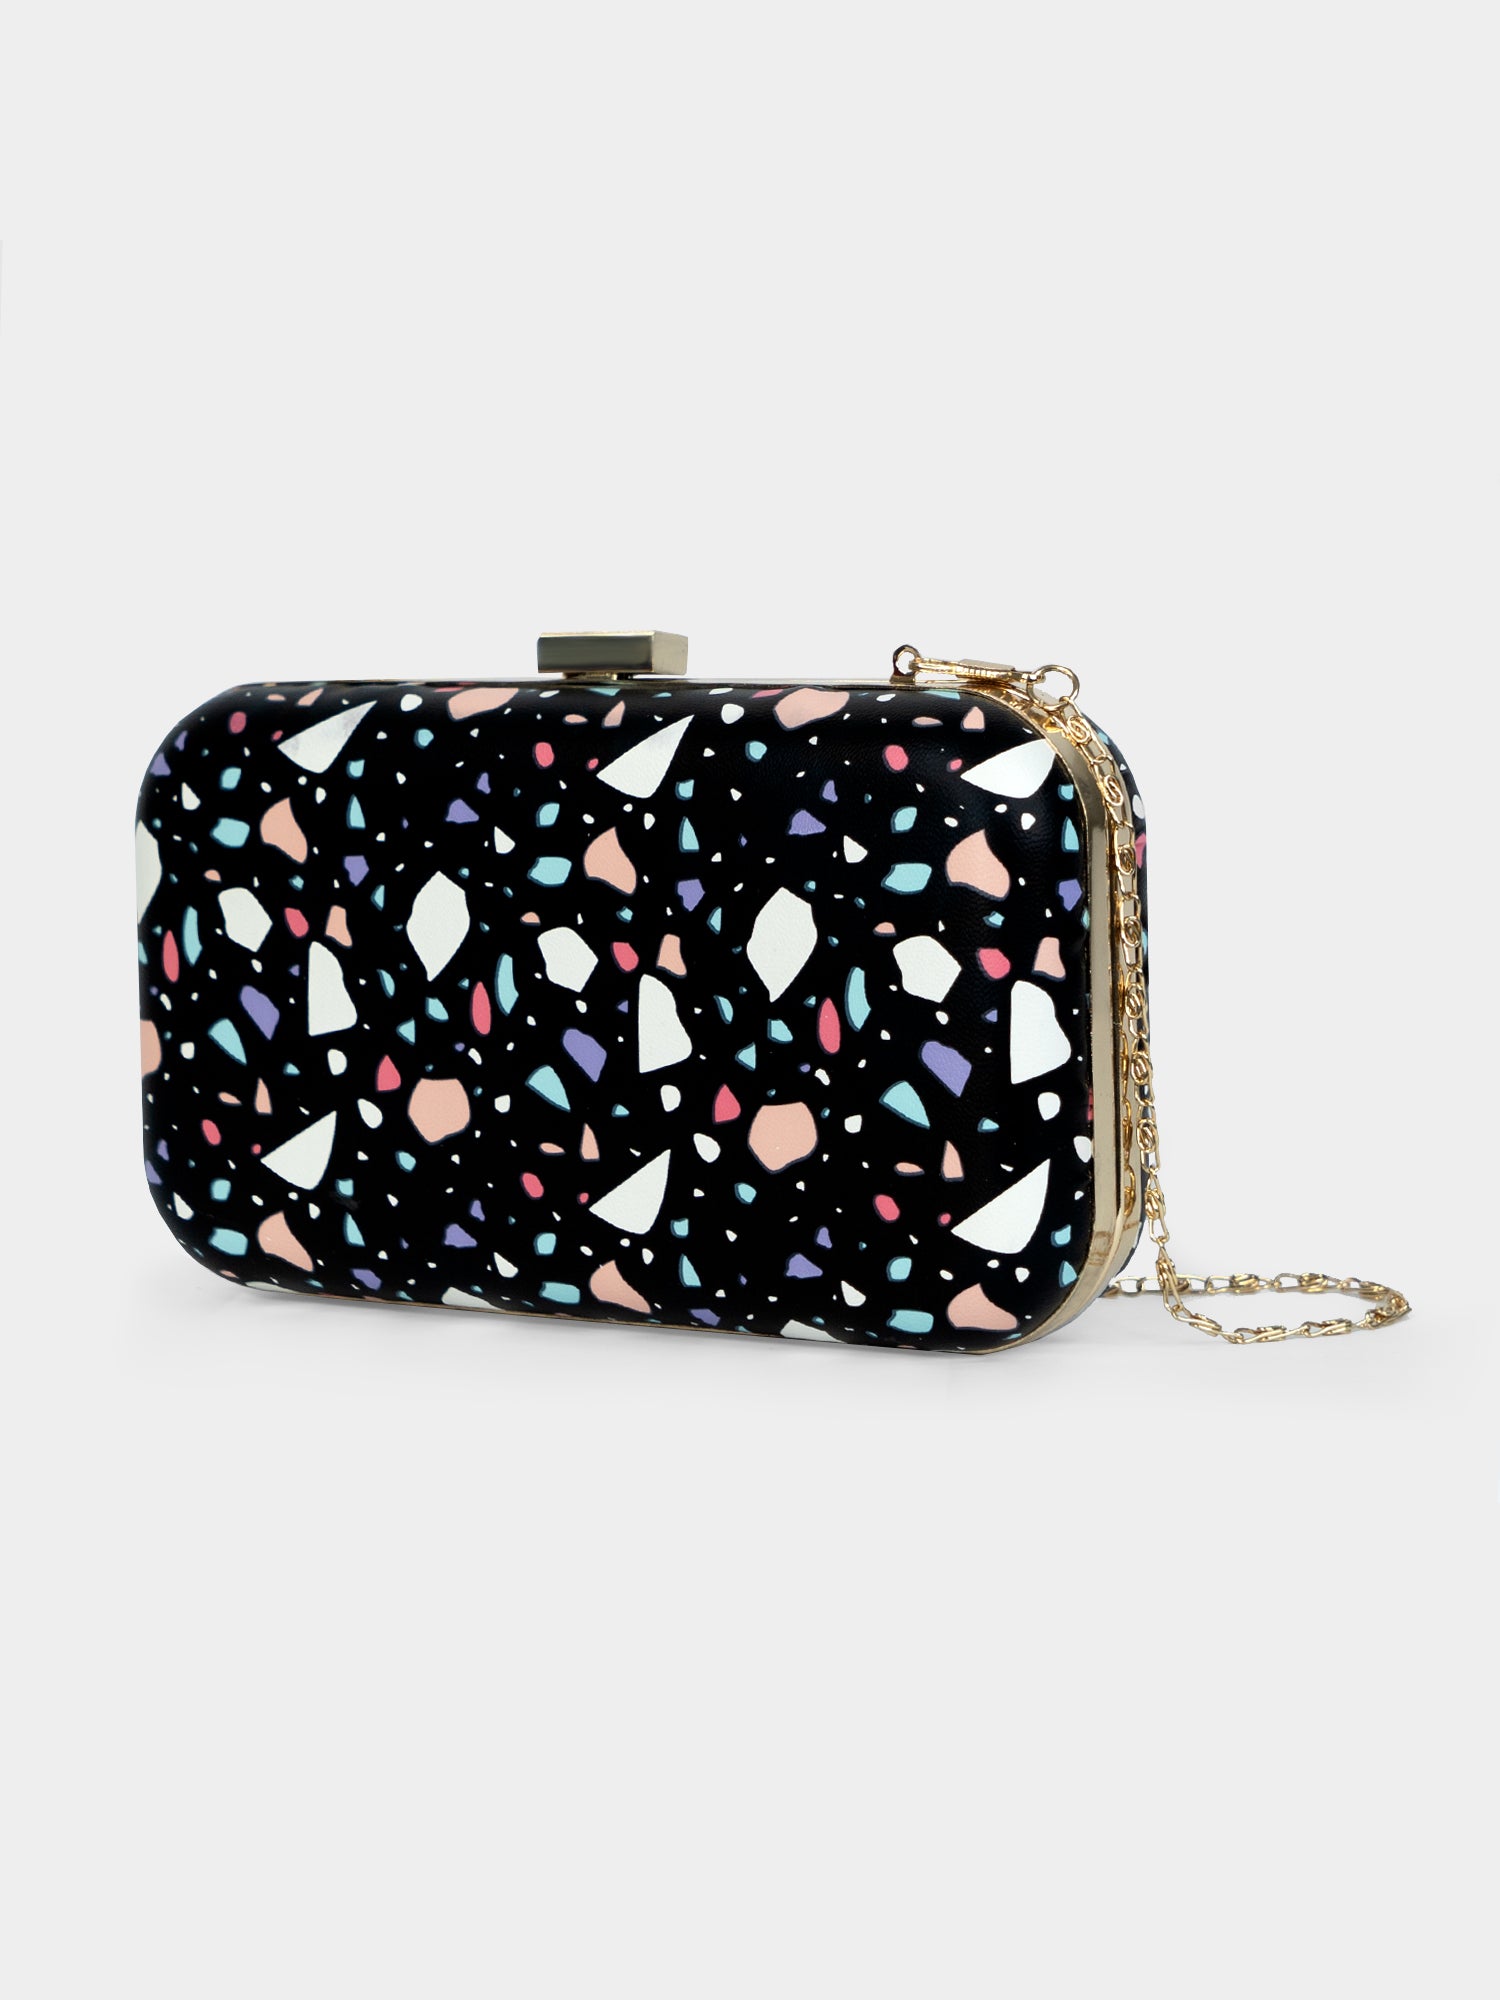 Black Clutch Bags & Evening Bags for Special Occasions | Accessorize UK